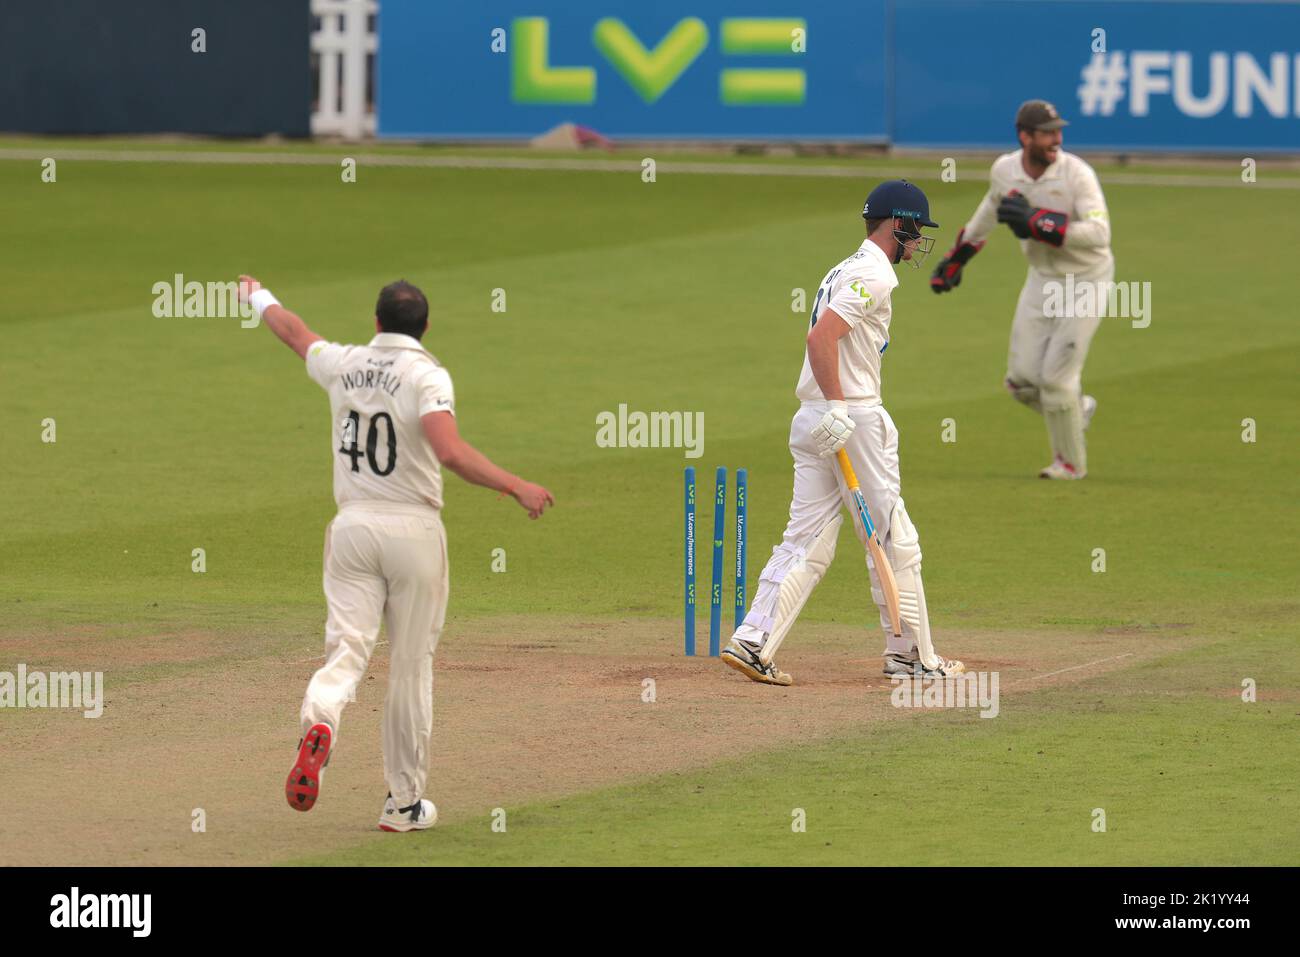 21 September, 2022. London, UK. Surrey’s Dan Worrall bowls Finlay Bean as Surrey take on Yorkshire in the County Championship at the Kia Oval, day two. David Rowe/Alamy Live News Stock Photo